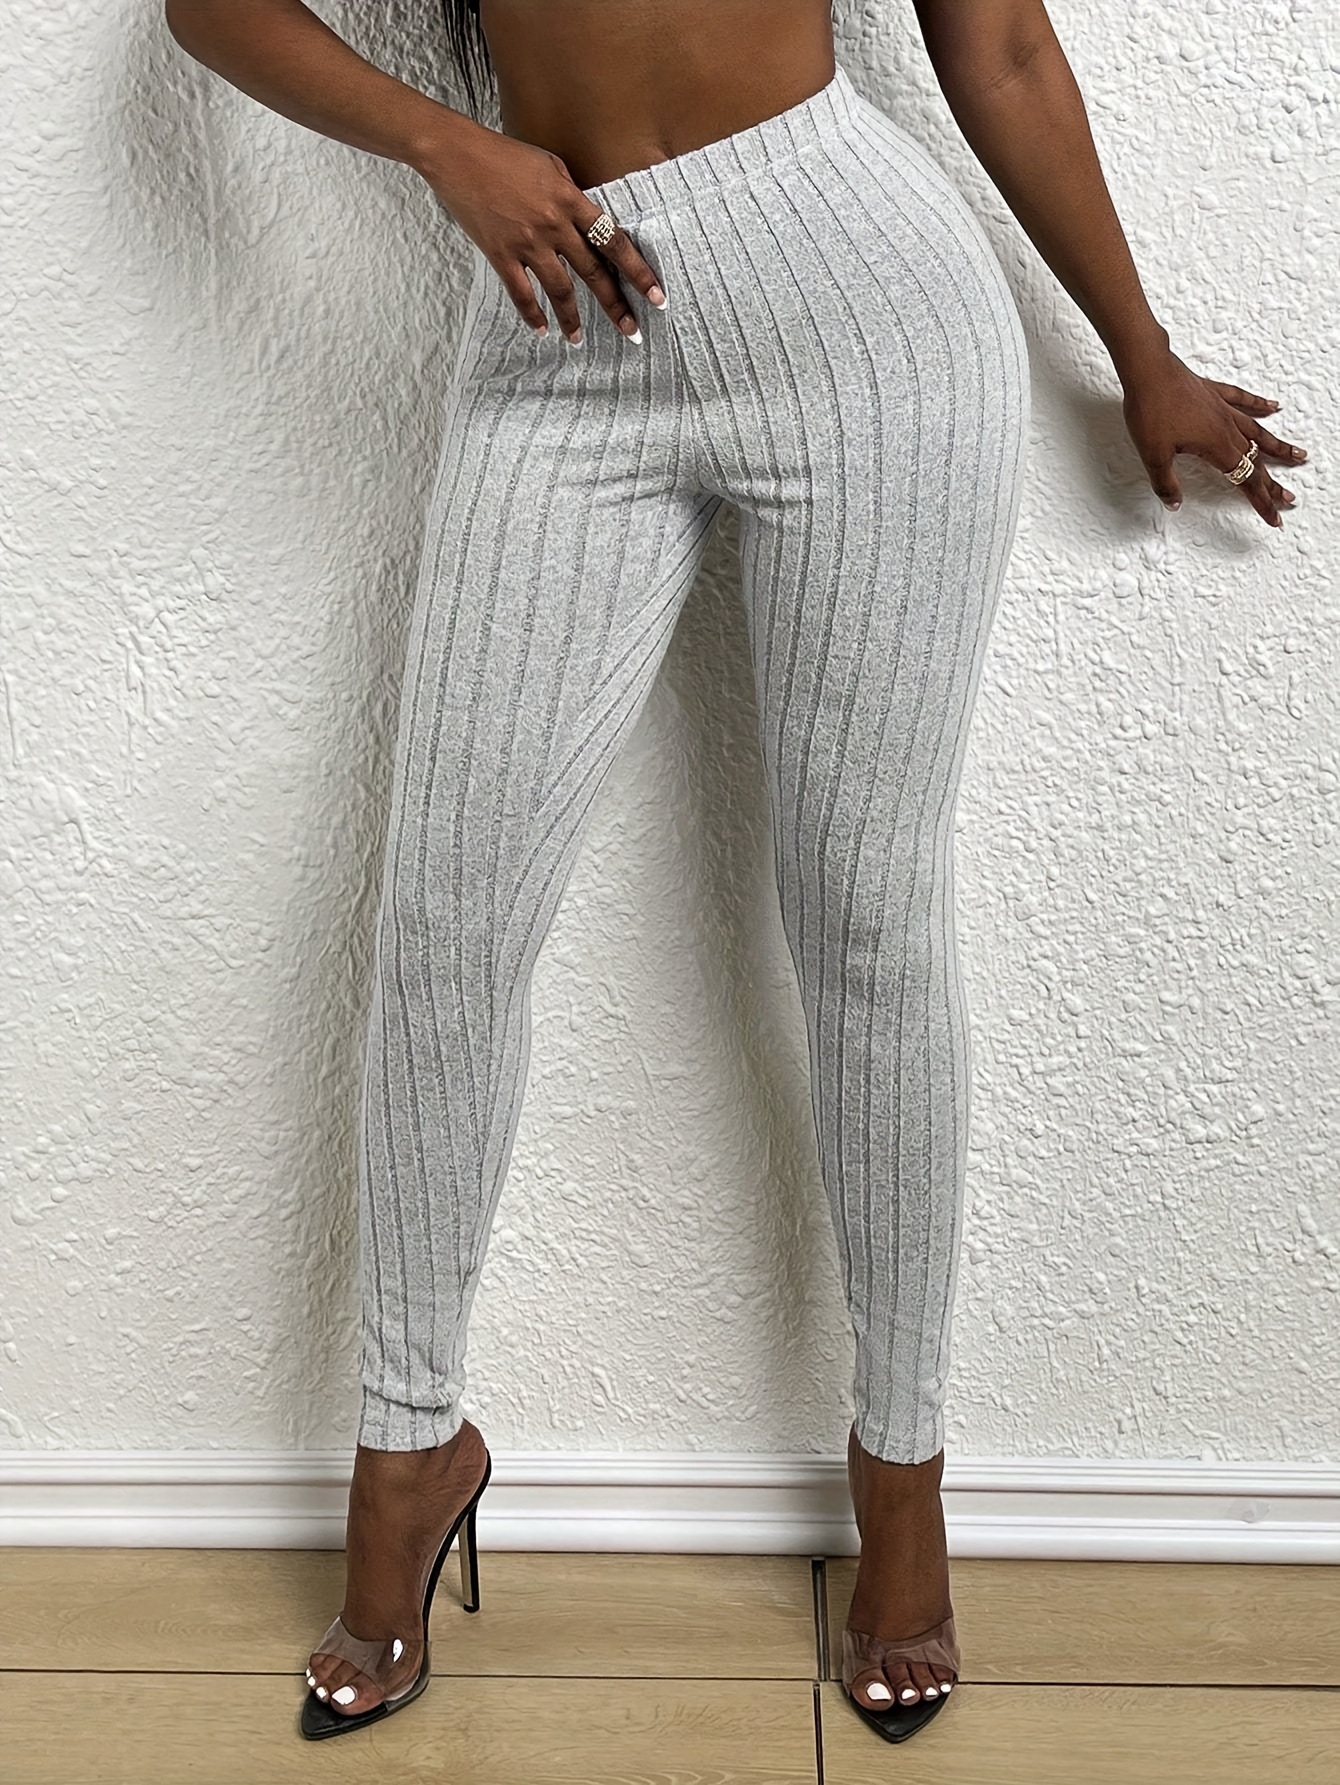 Ribbed Knit Skinny Leggings Casual Every Day Stretchy Pocket